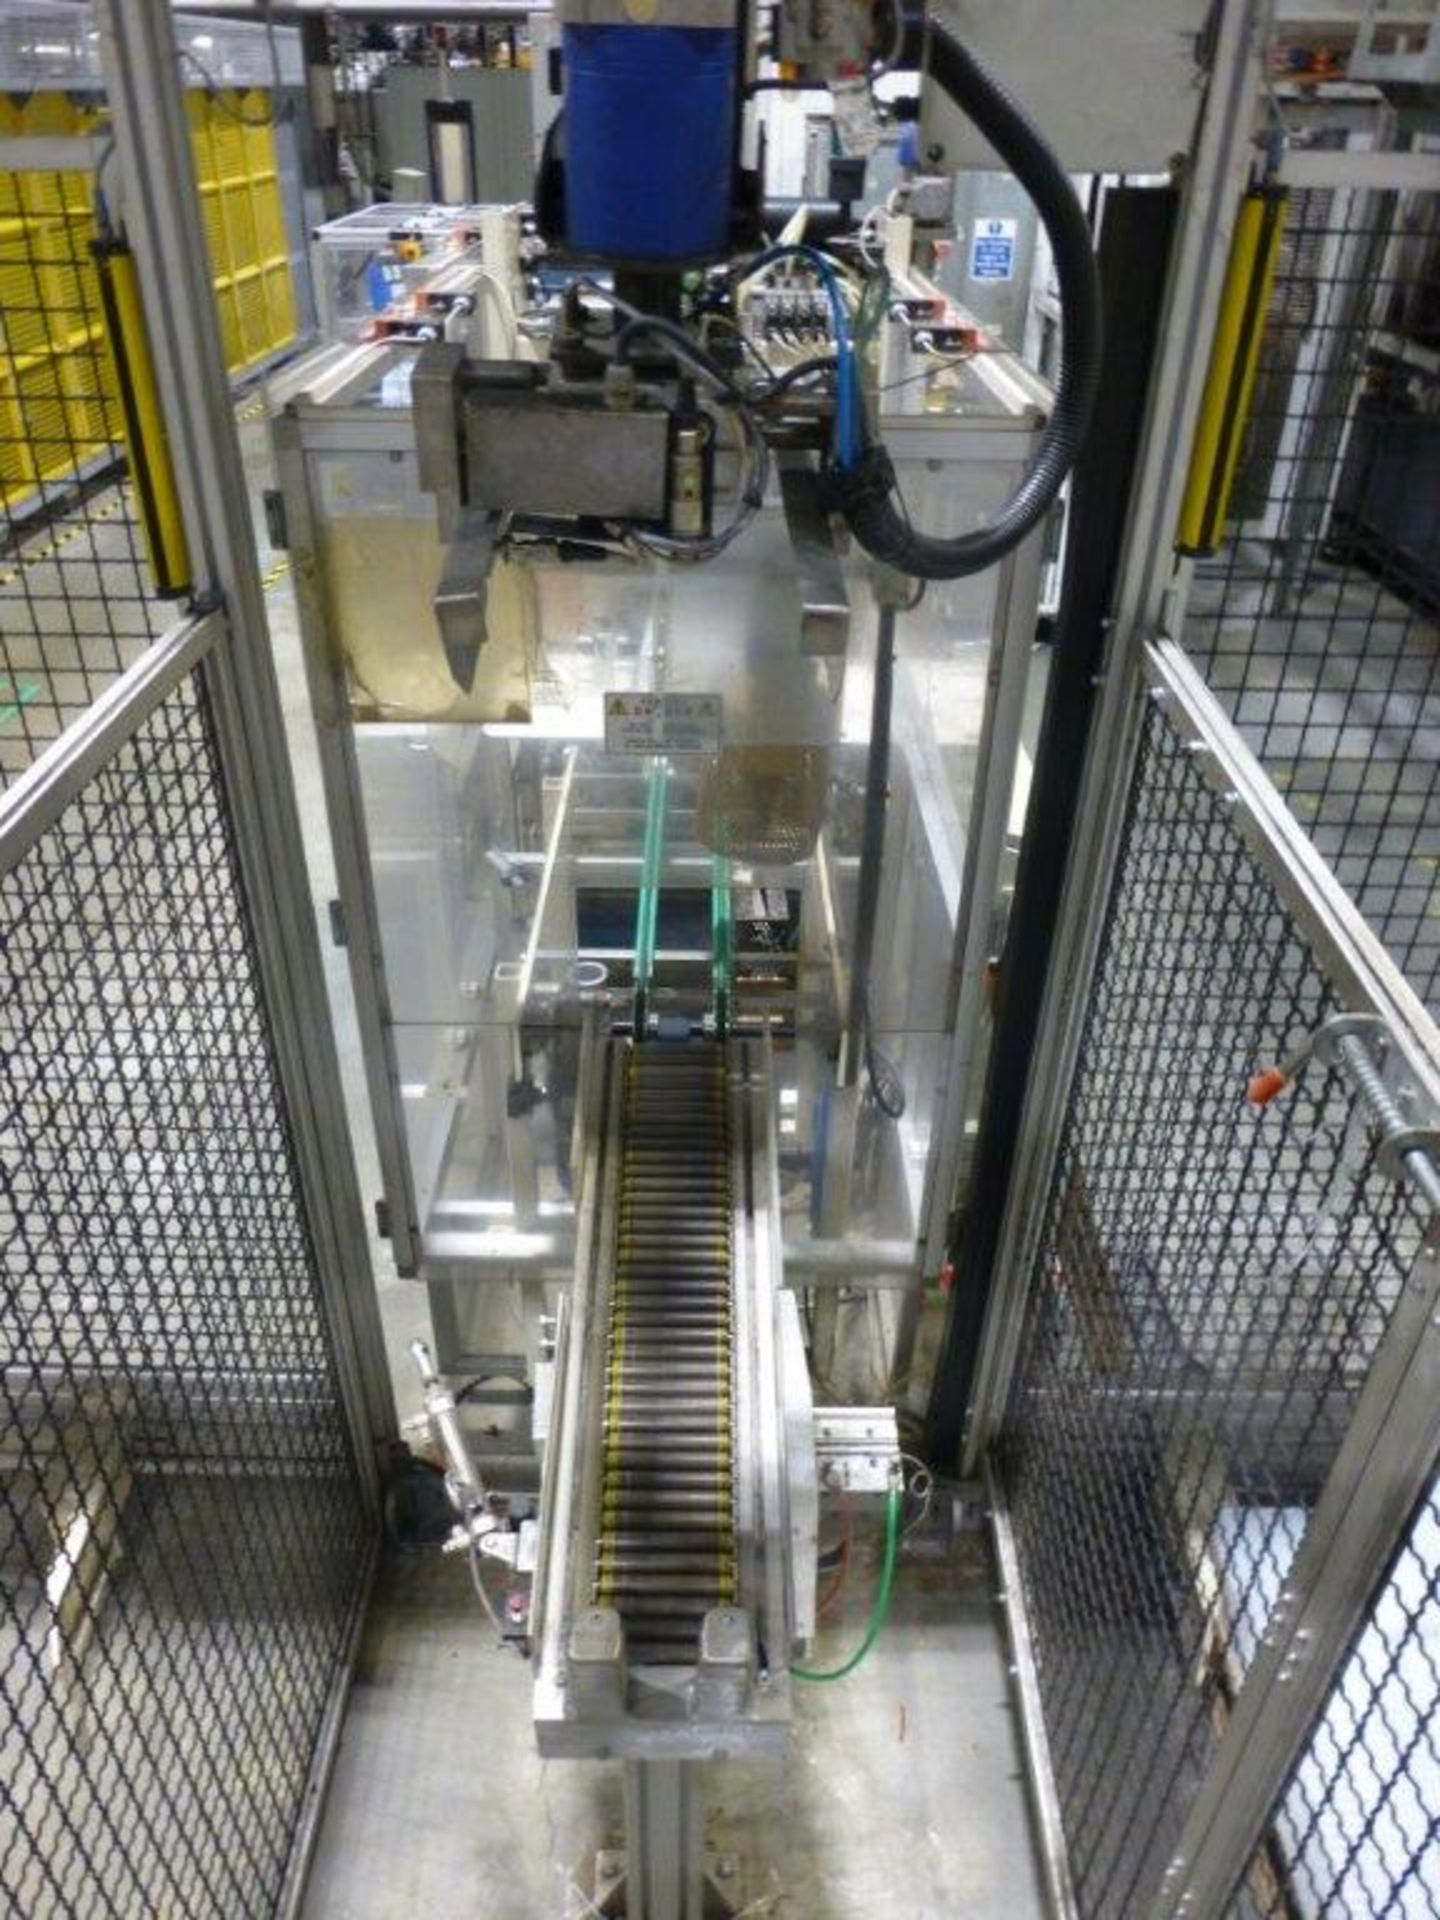 SCM Handling Twin Pallet Robot Palletiser Serial No. BC4272-SI4478-04.01-C11 with freestanding - Image 4 of 5